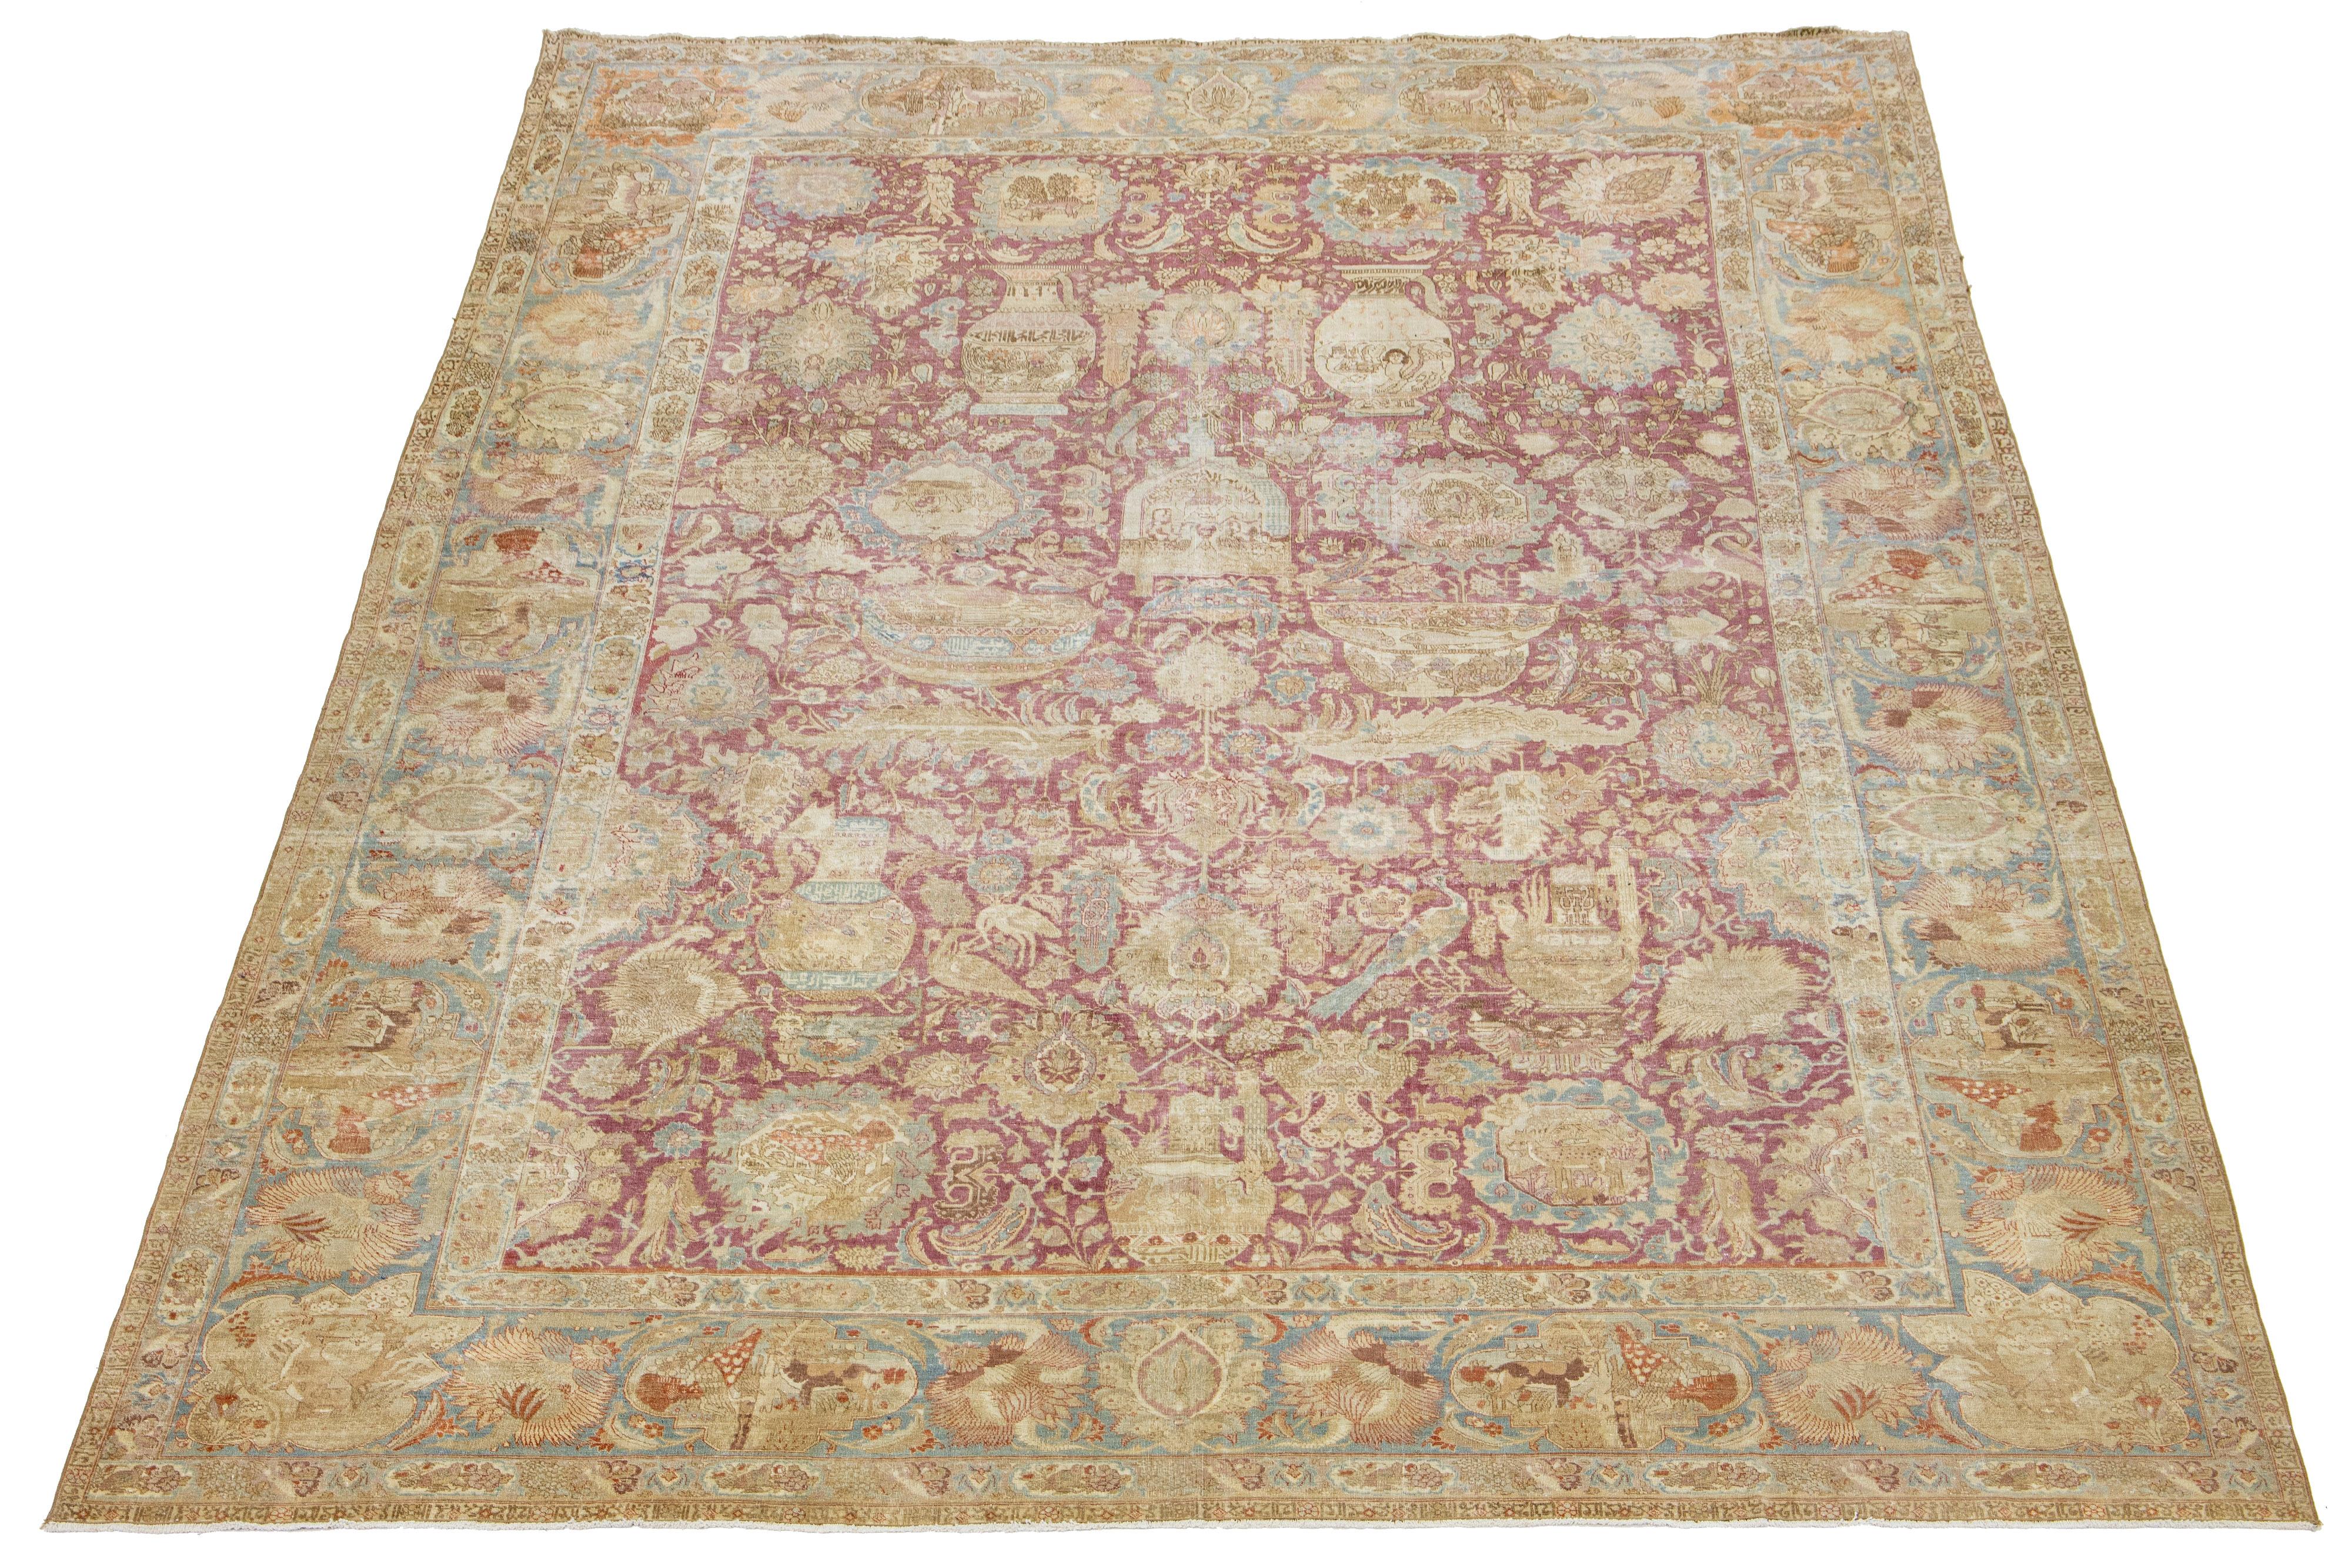 The Persian Tabriz wool rug is handcrafted and showcases a beautiful traditional floral pattern. The alluring contrast between the red raspberry background and the intricate beige, blue, and brown floral design further enhances its beauty.

This rug